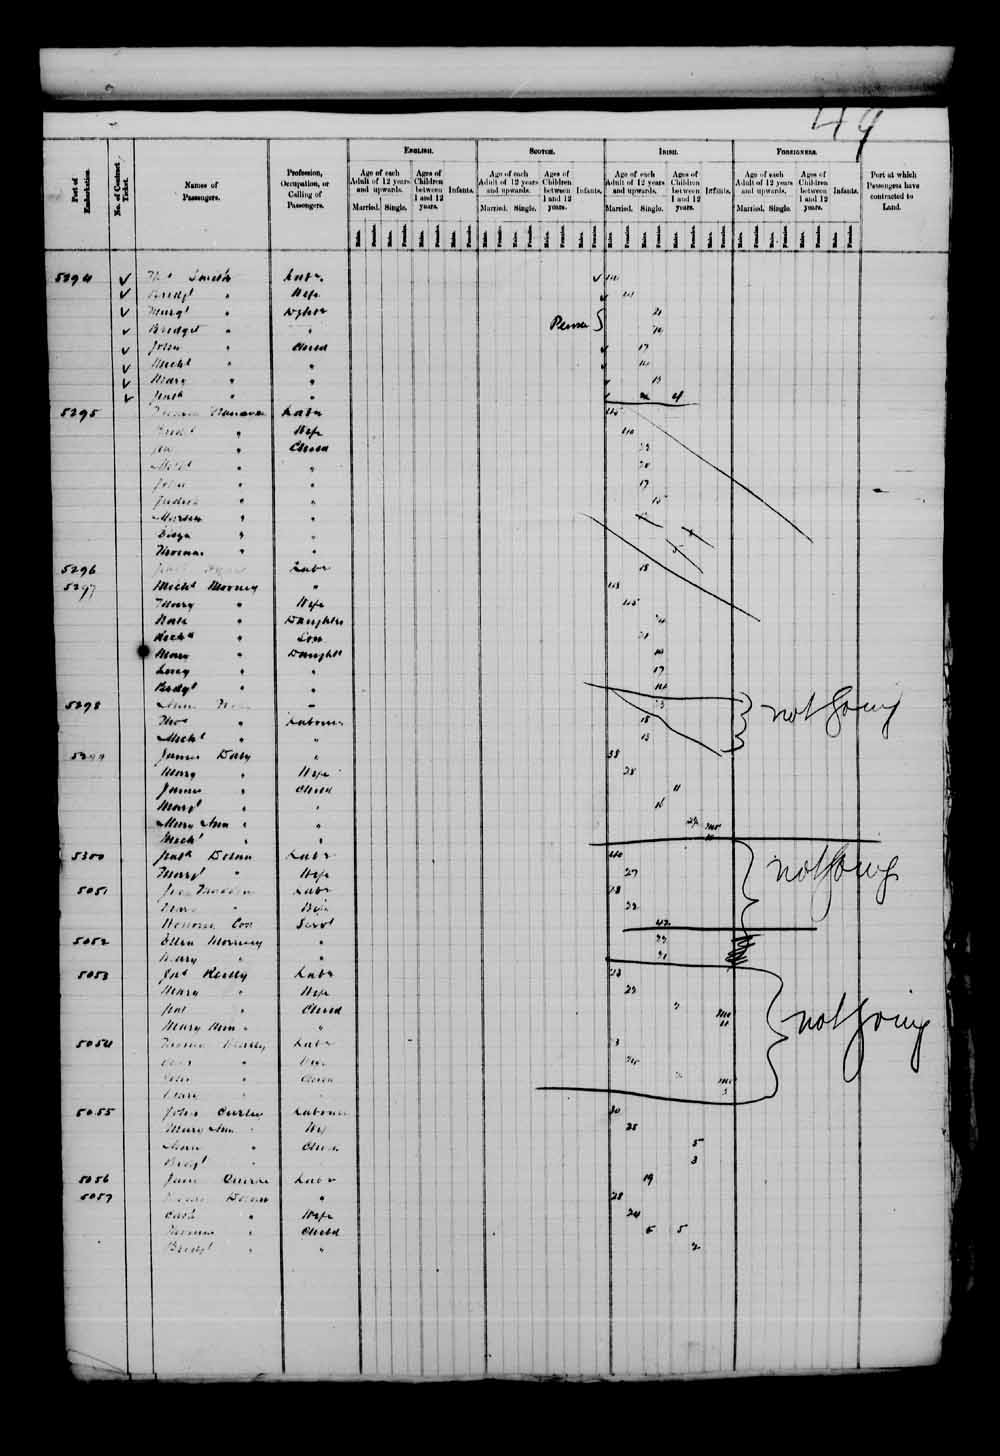 Digitized page of Passenger Lists for Image No.: e003543406